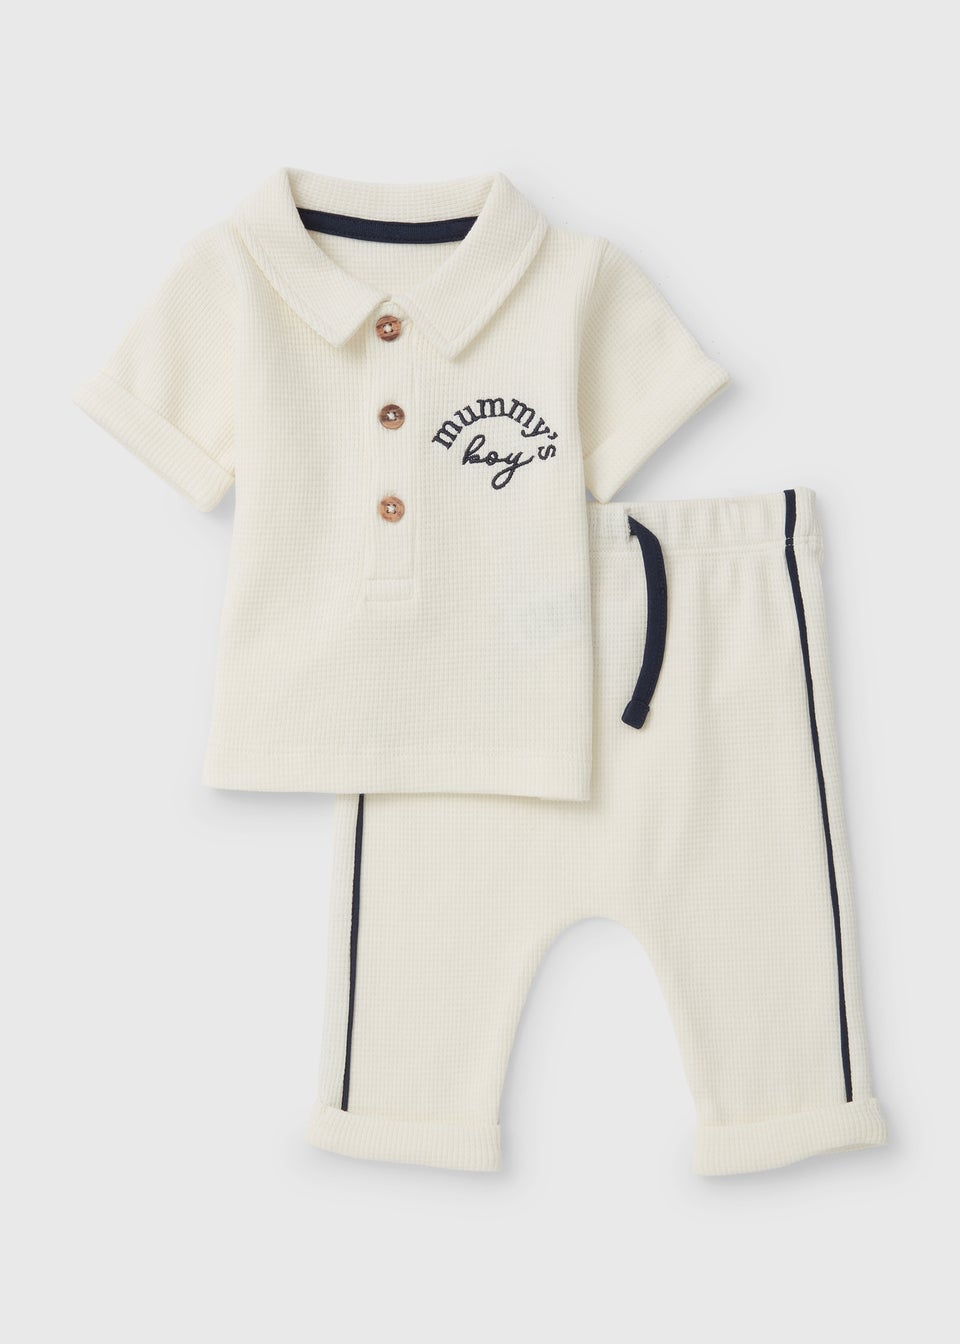 jaweiw Baby Boys Mother's Day Outfits Set, Short Sleeve Letter Print  T-Shirts + Pocket Shorts,Size 0 6 12 18 24 M - Walmart.com